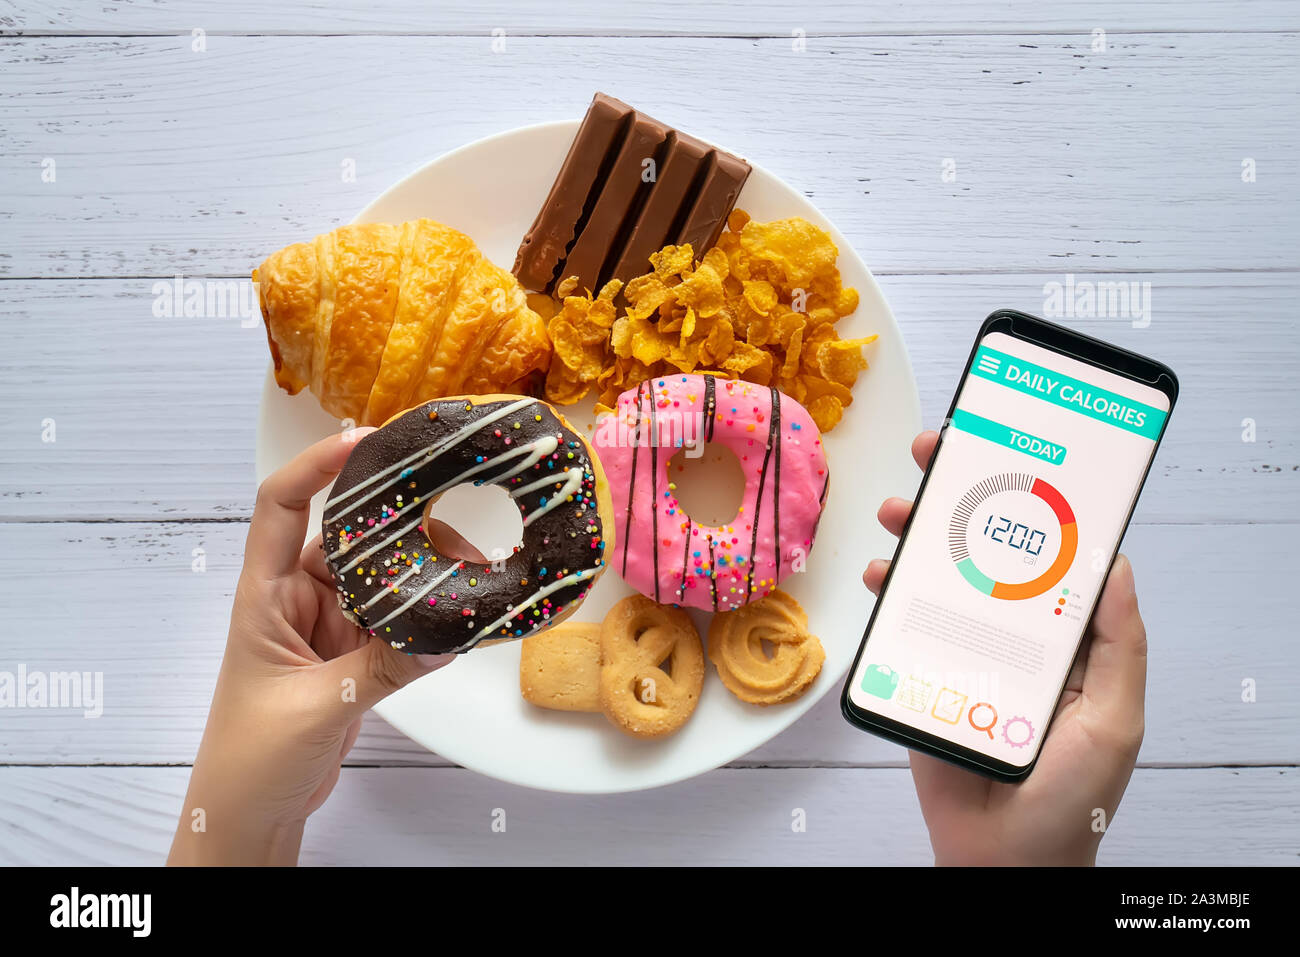 Calories counting and food control concept. woman using Calorie counter application on her smartphone with doughnut in hand and snack , cookies on pla Stock Photo